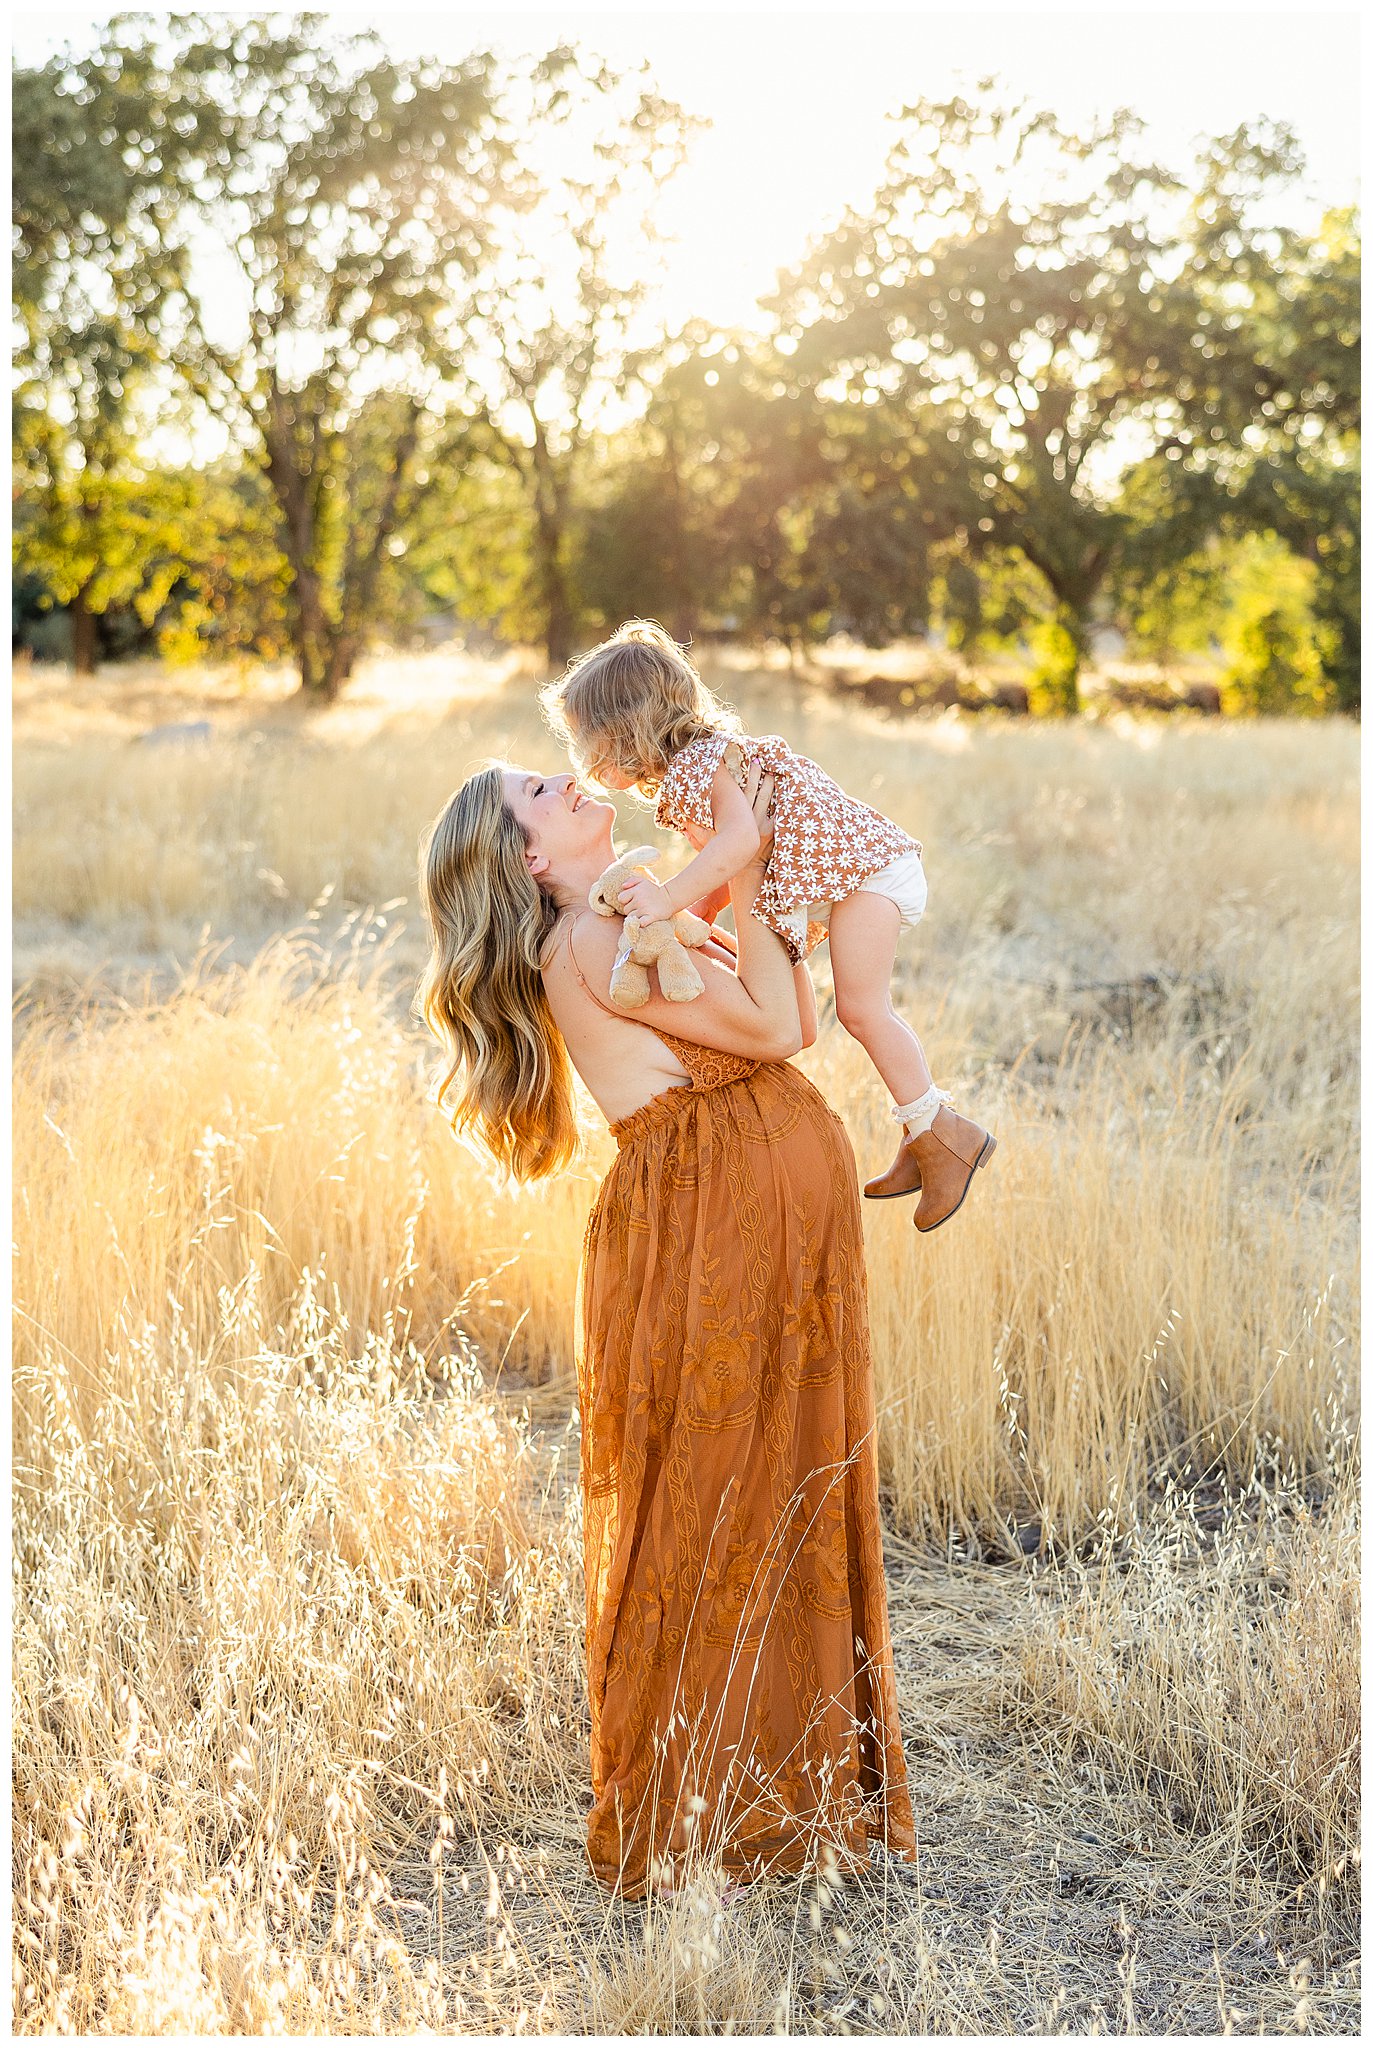 Grass Field Maternity Session Chico CA Fall Late August Summer,